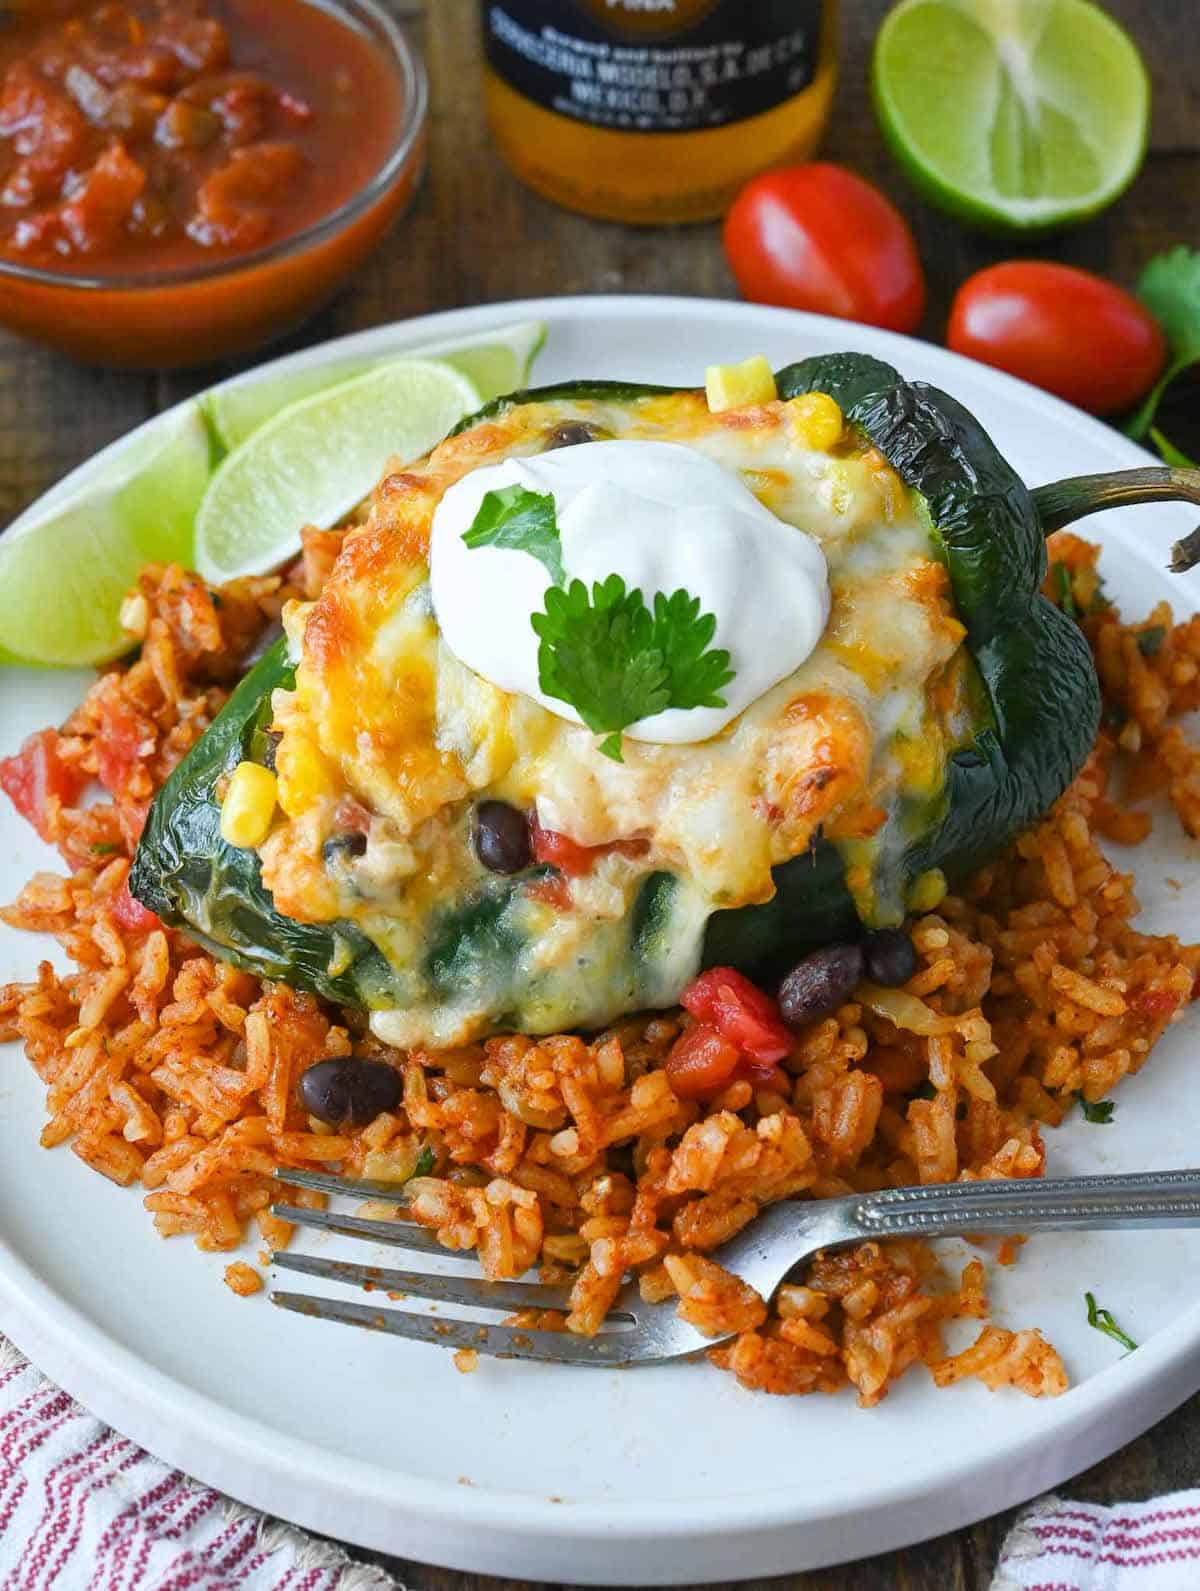 Chicken and cheese stuffed poblano pepper on top of Mexican rice.